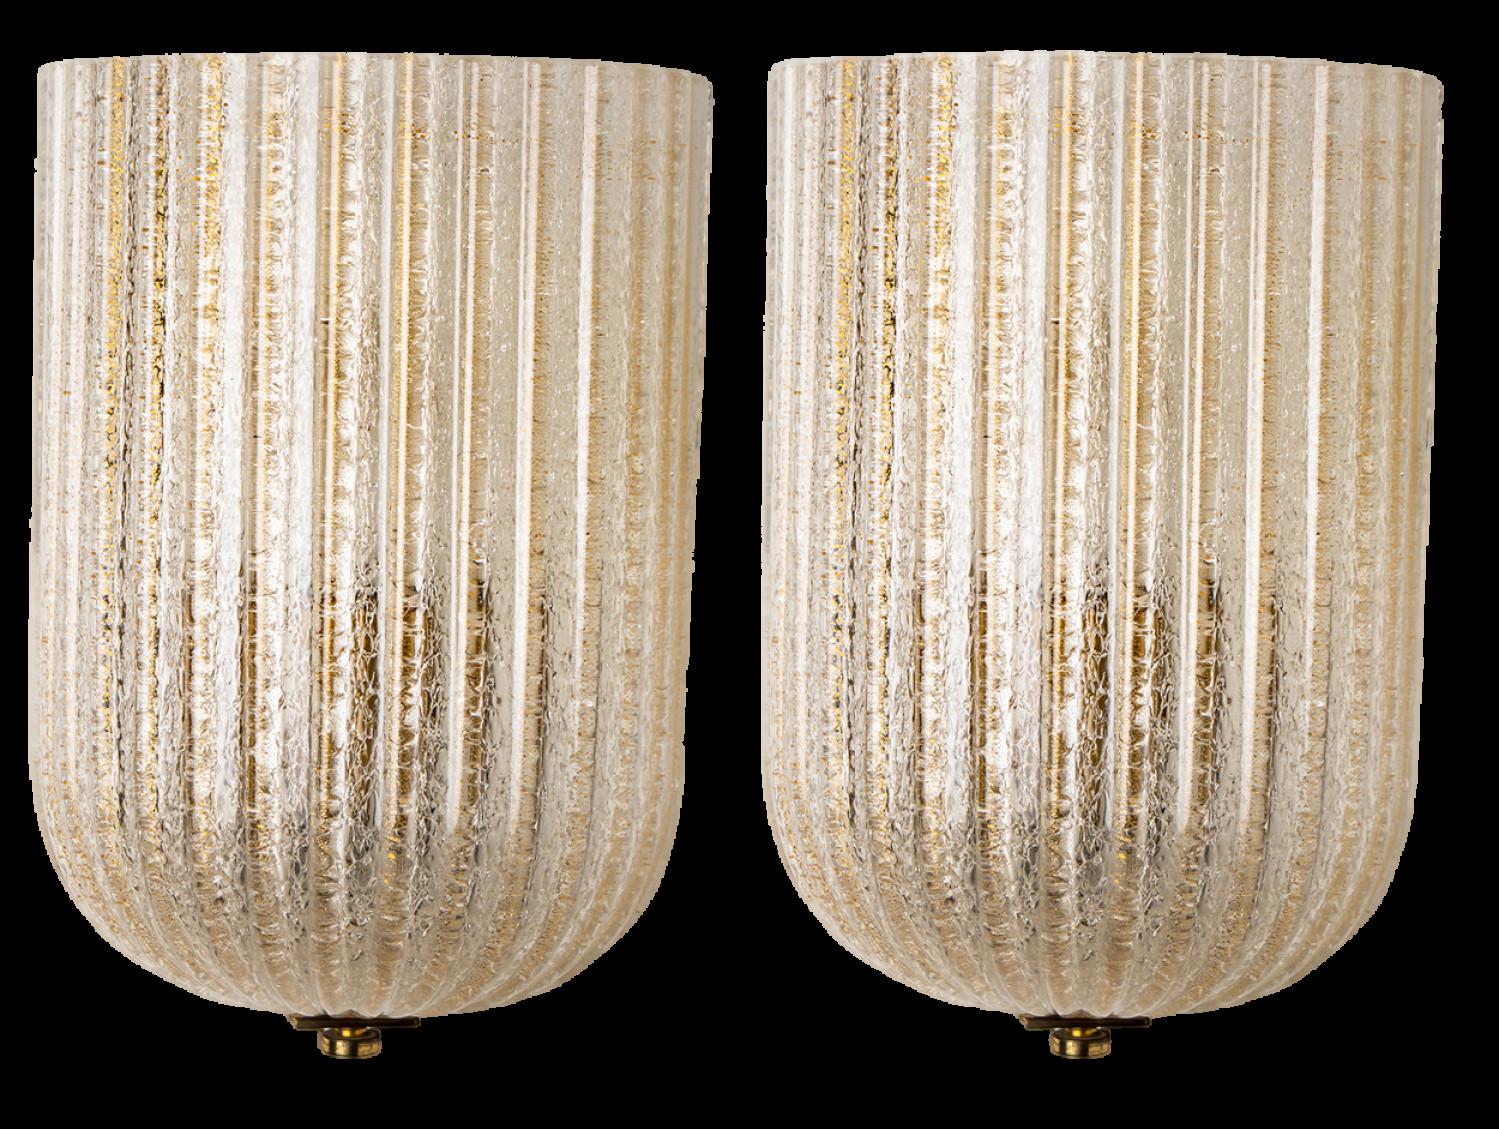 1 of 2 of elegant and exquisite hand blown Murano glass Barovier wall sconces with special gold inclusions. Each light fixture consists one blown Murano glass 